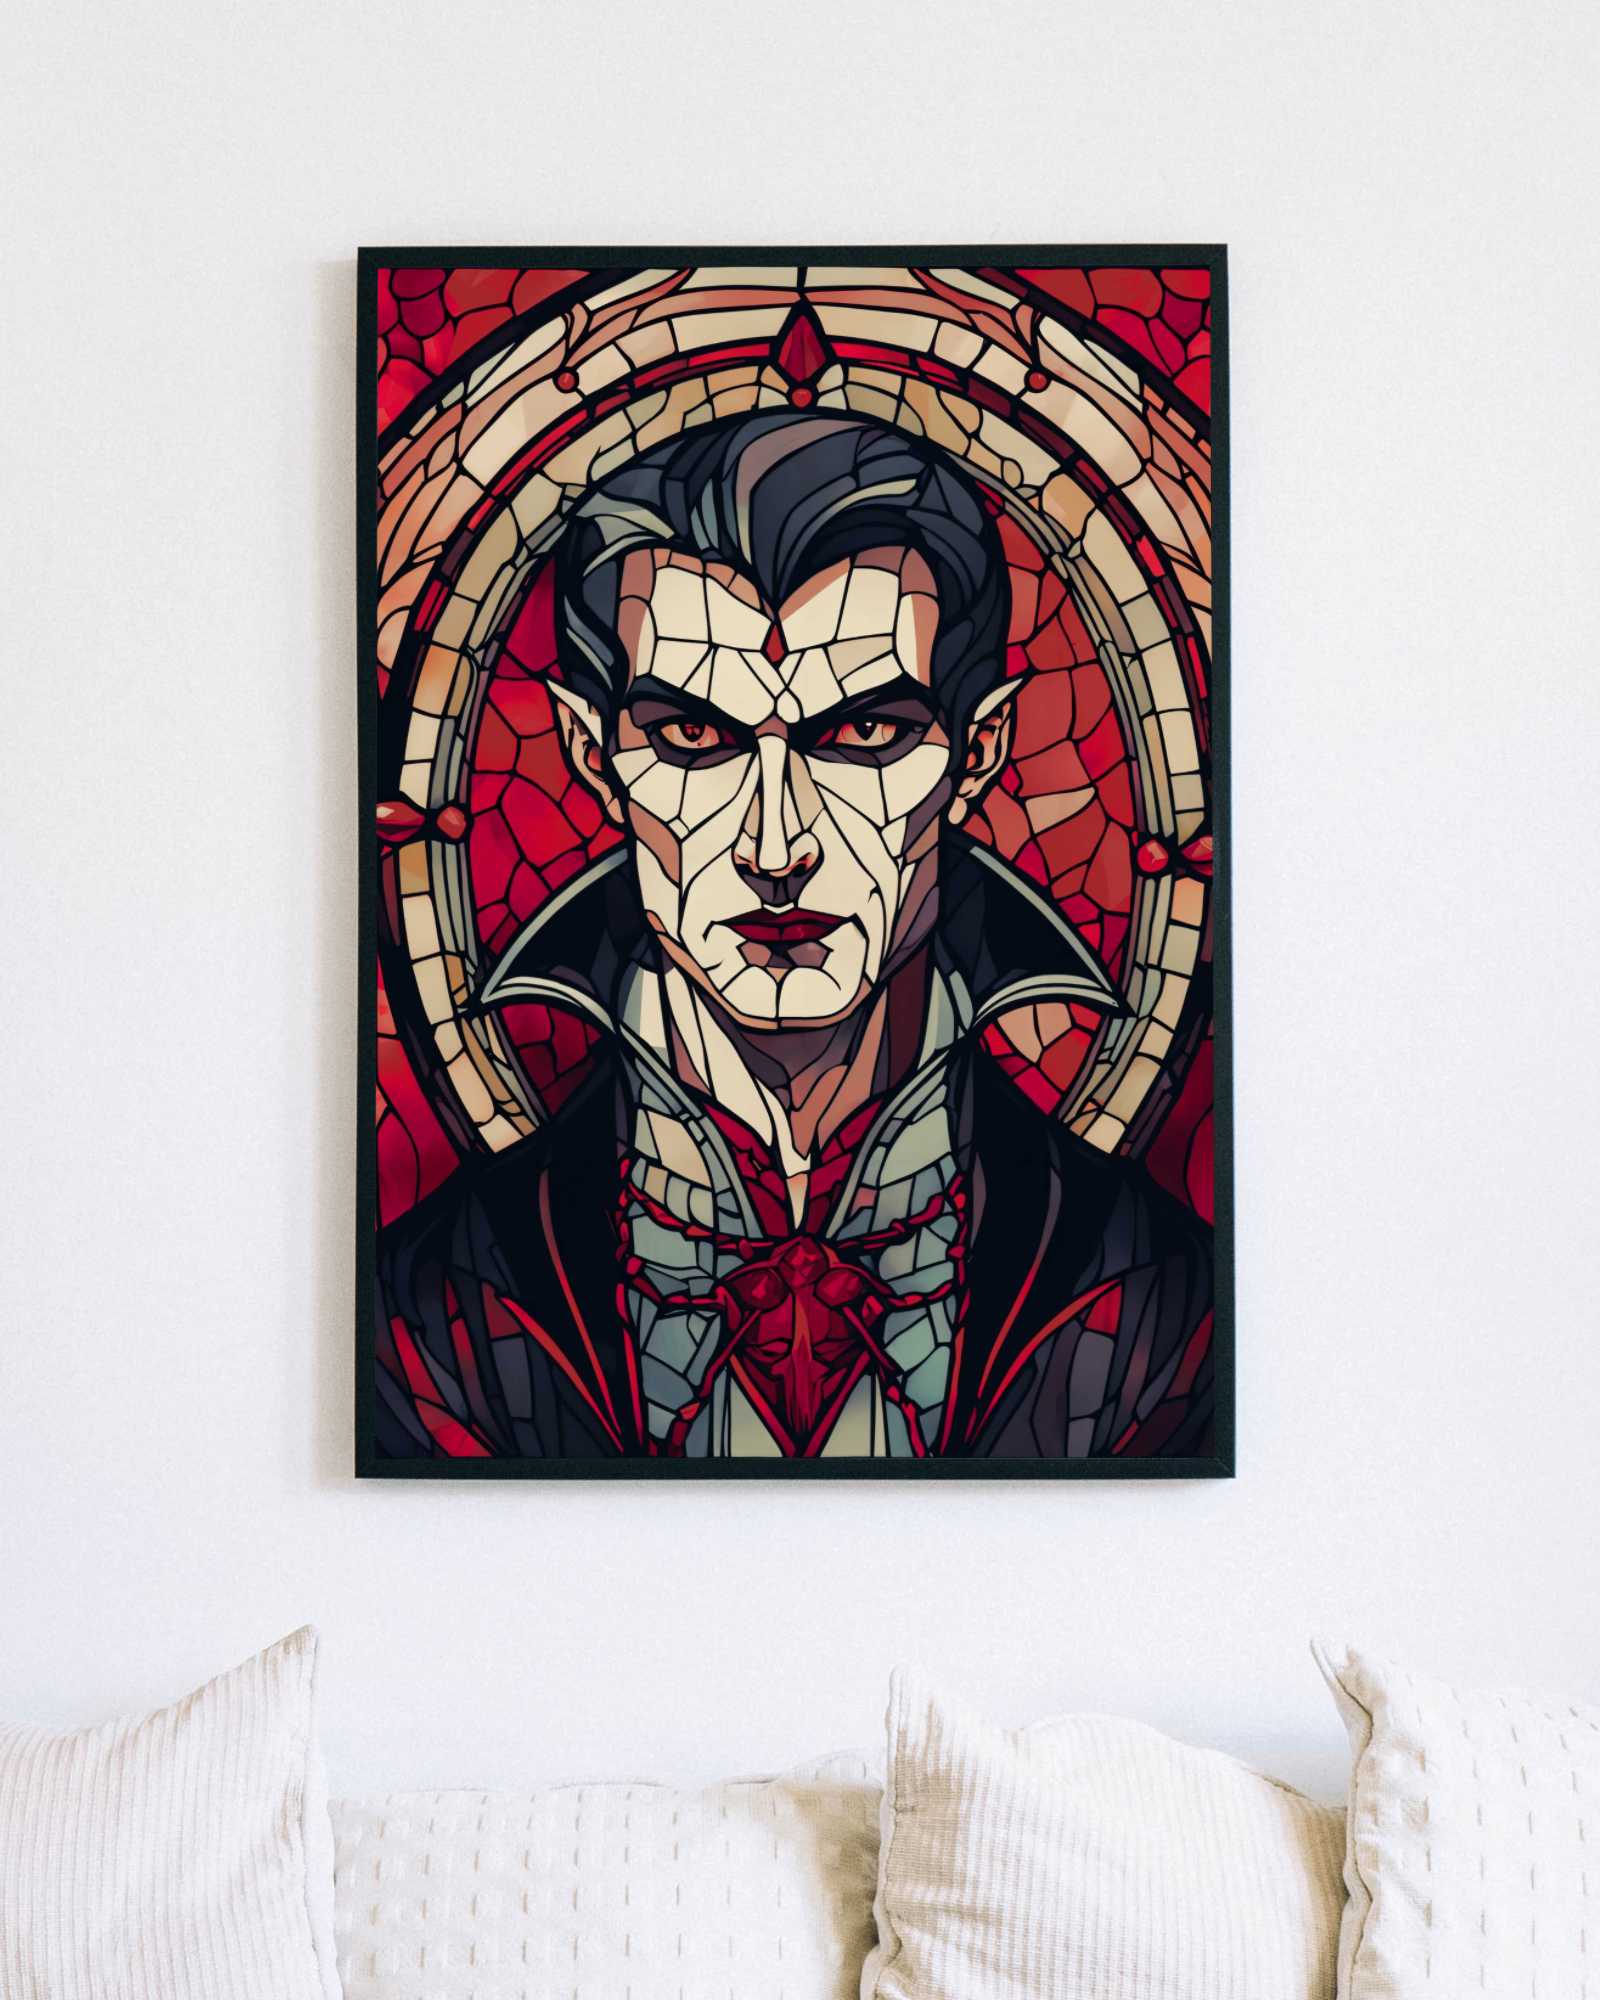 Charming vampire - Poster - Ever colorful